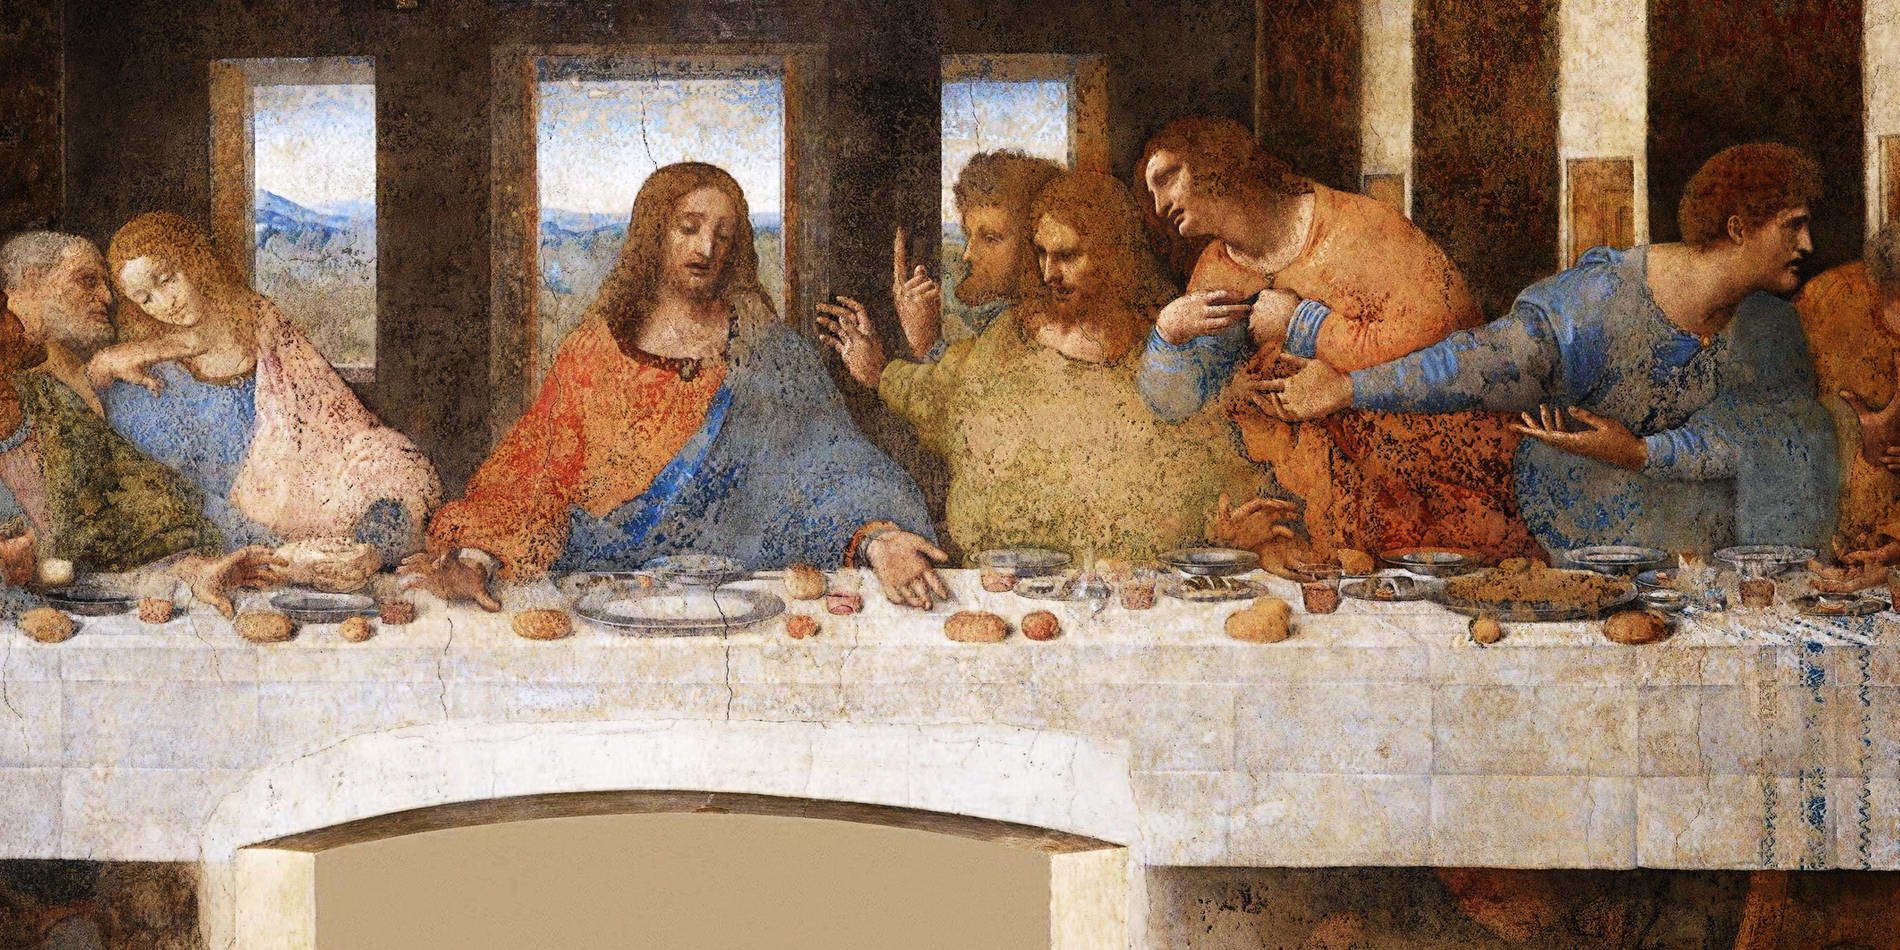 The Last Supper painting.